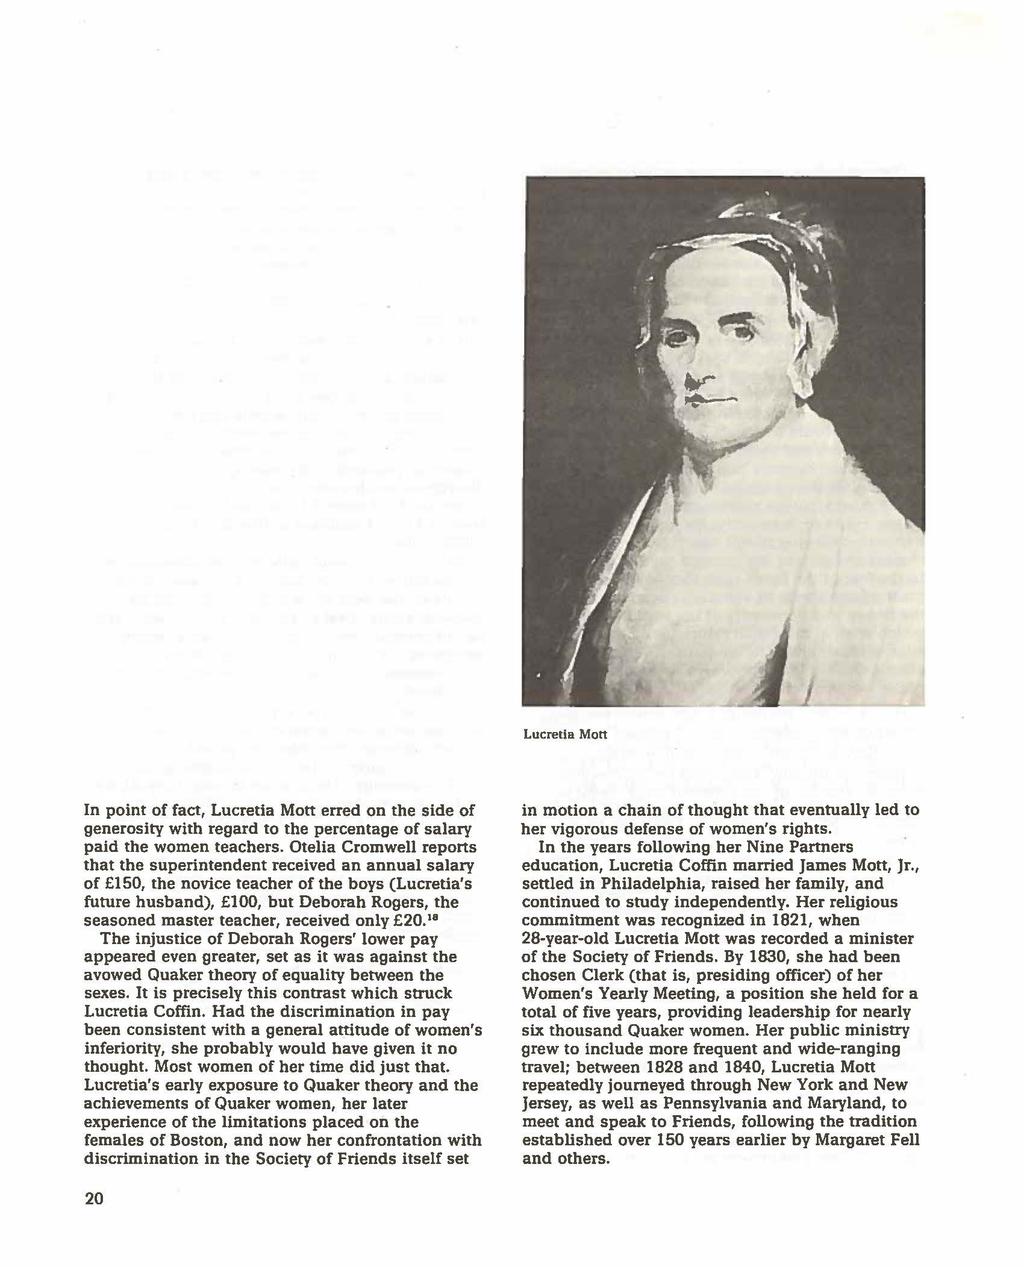 Lucretia Mon In point of fact, Lucretia Mott erred on the side of generosity with regard to the percentage of salary paid the women teachers.